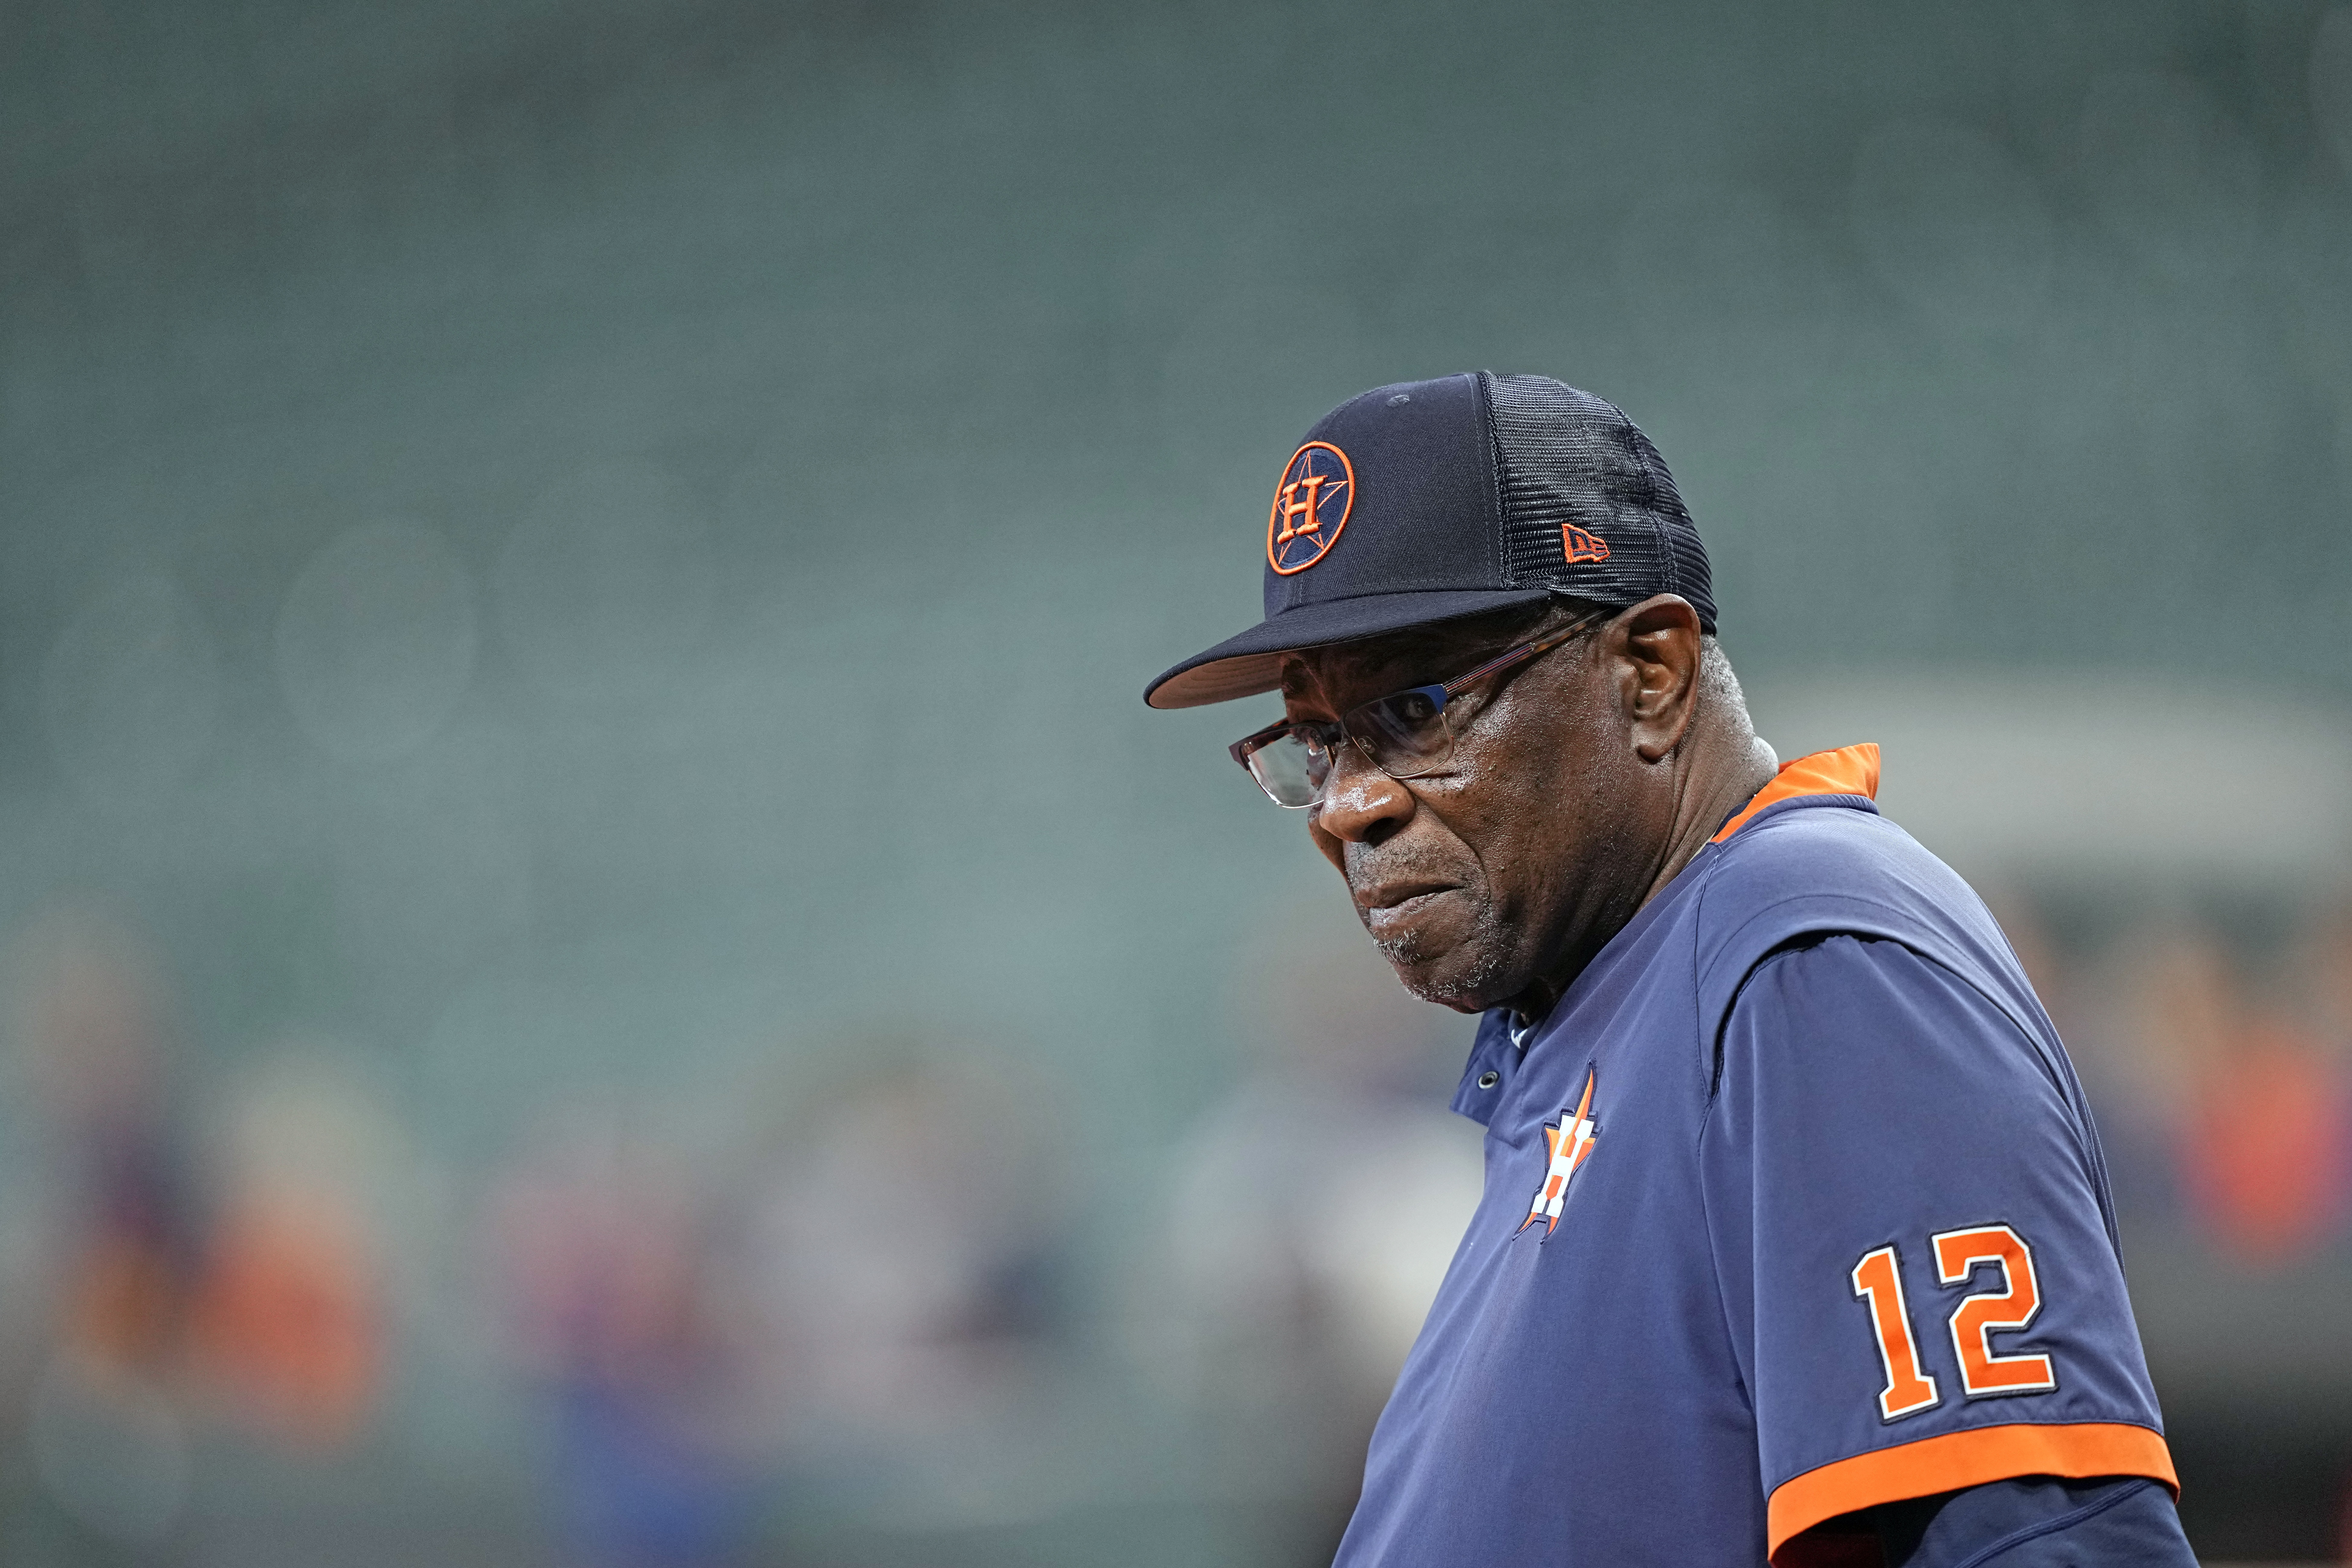 Dusty Baker back after missing 5 games with COVID-19 - Newsday